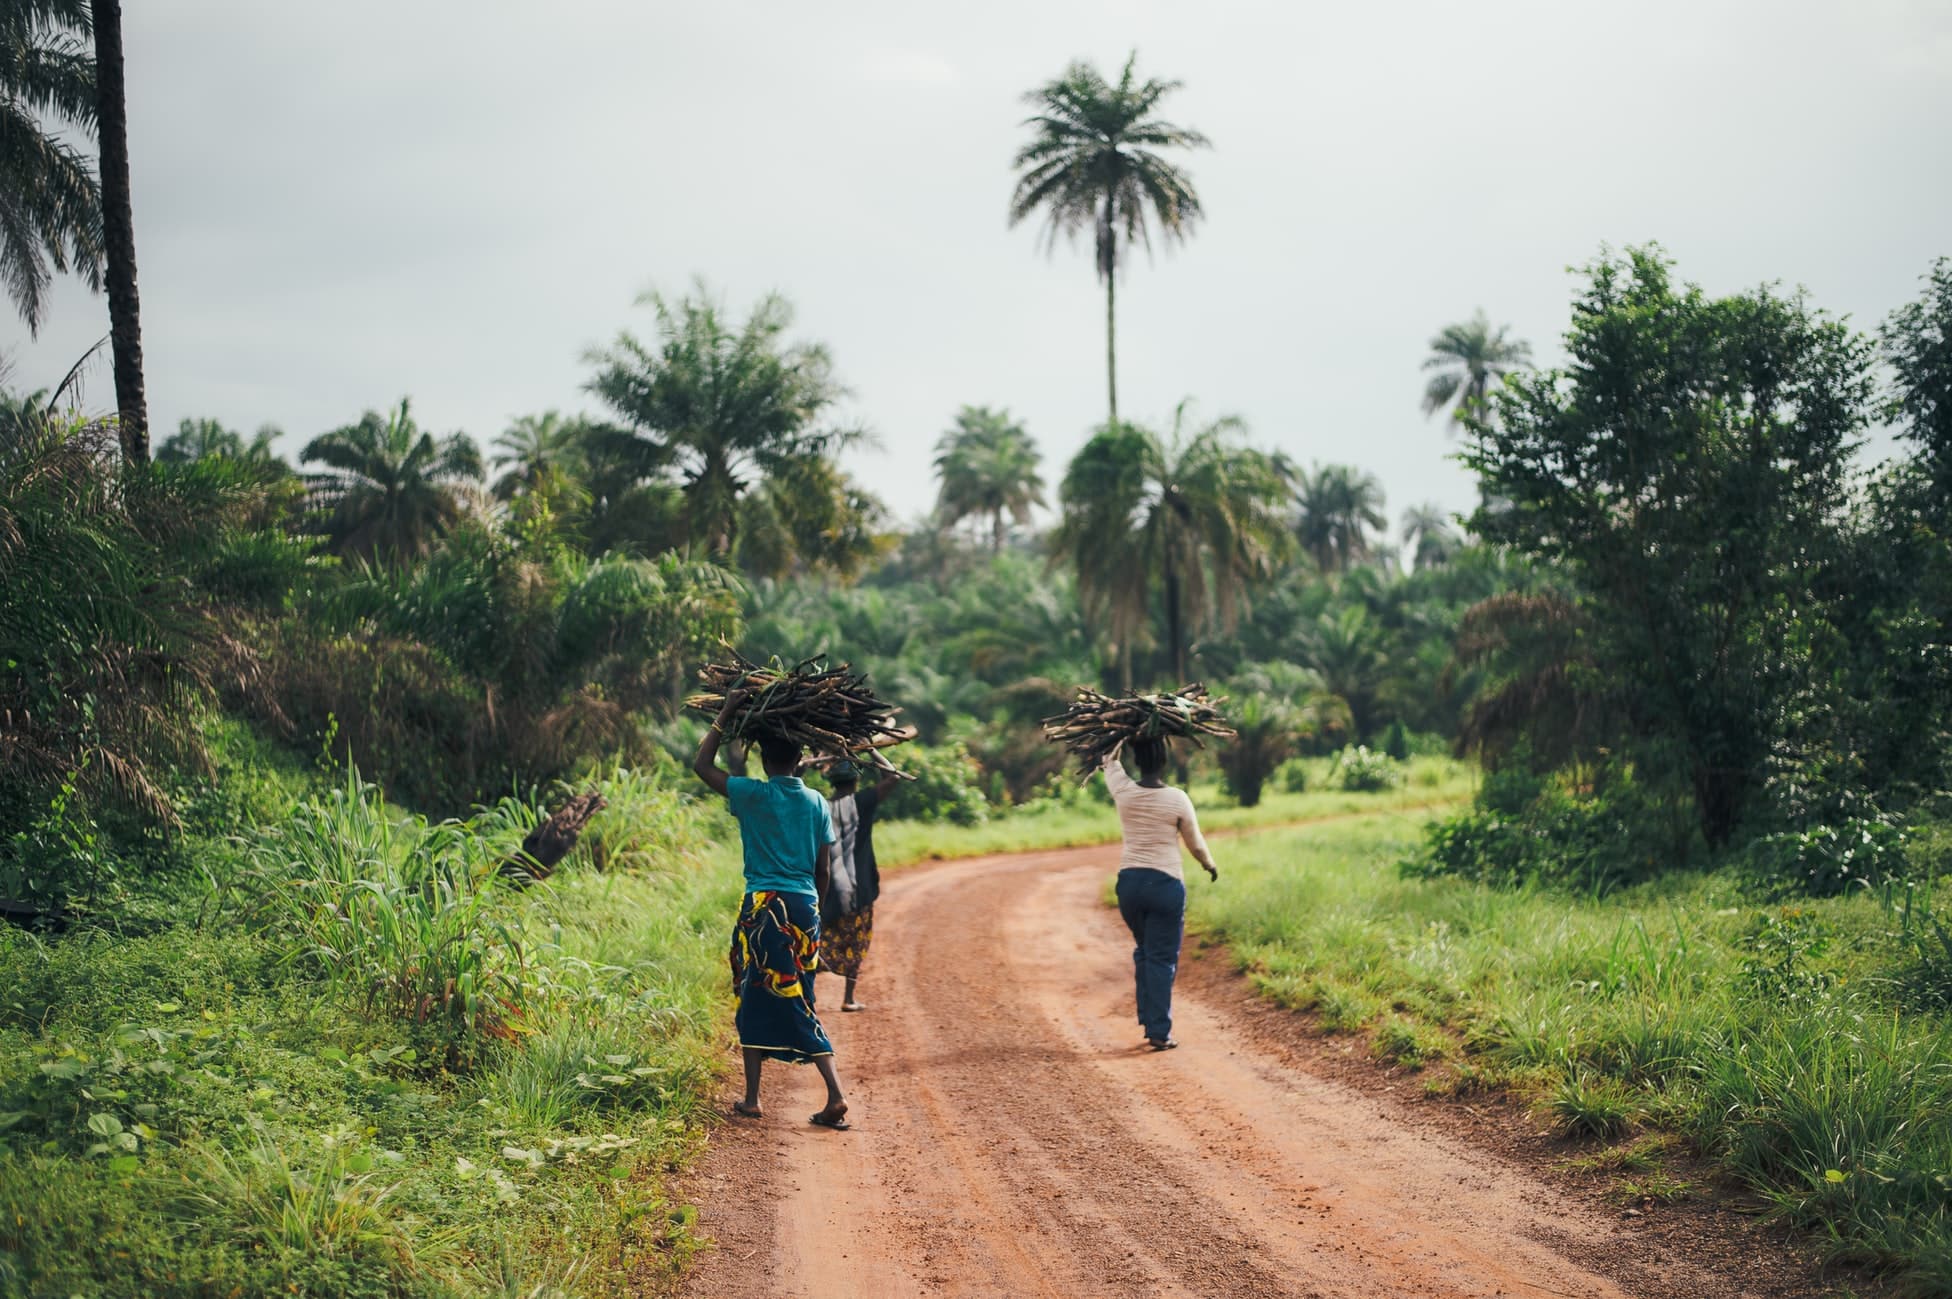 three people carrying wood along dirt road